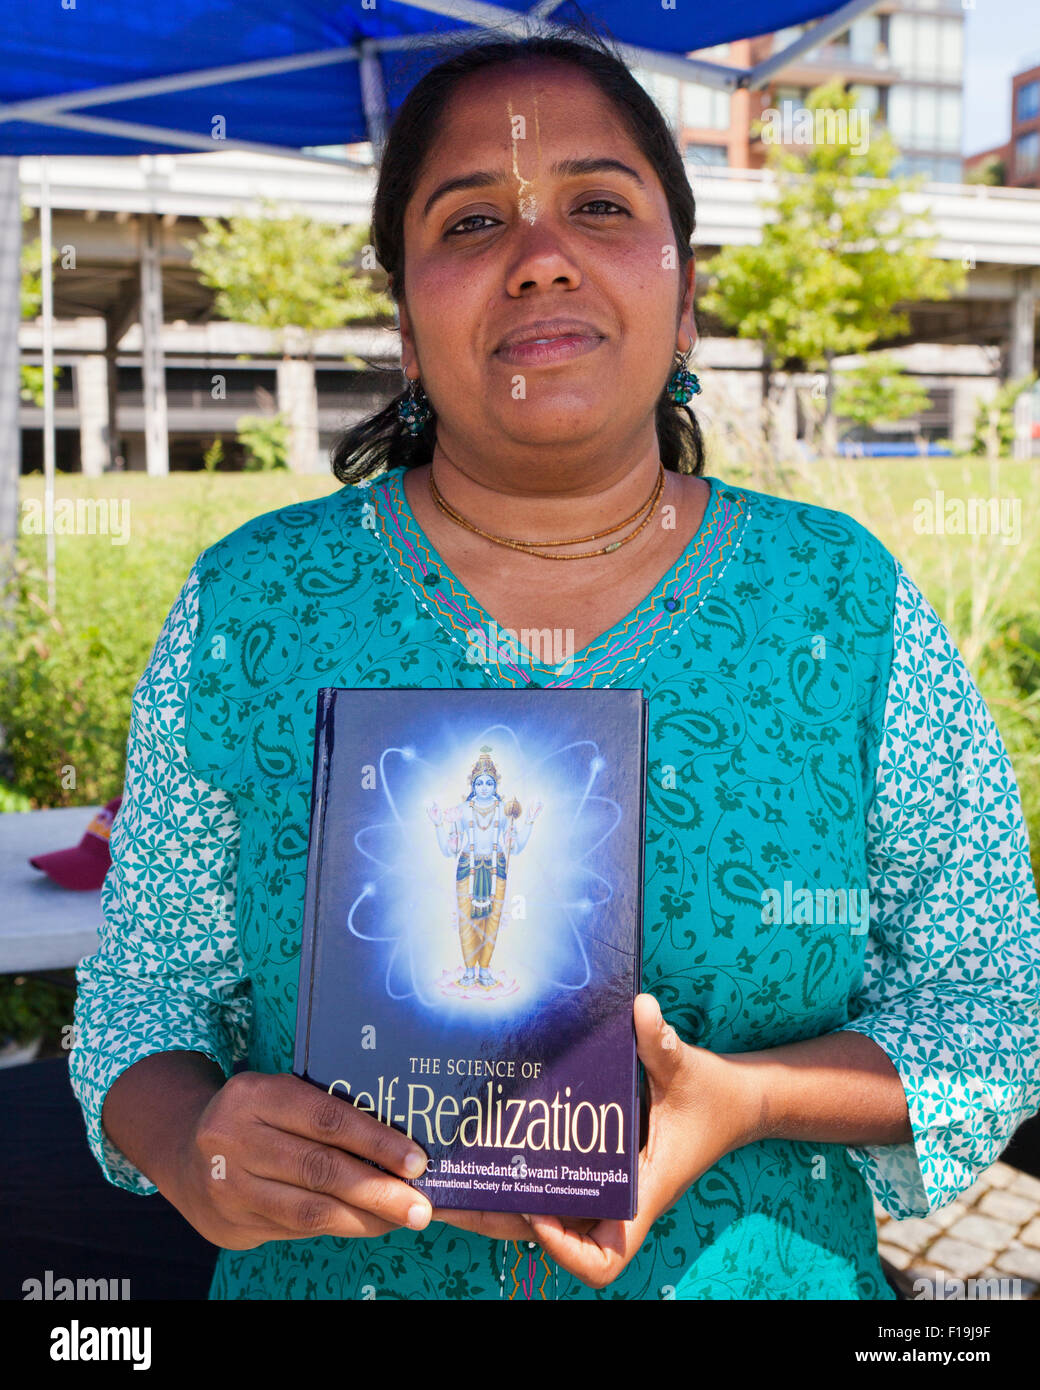 Hare Krishna woman holding Self-Realization livre - USA Banque D'Images